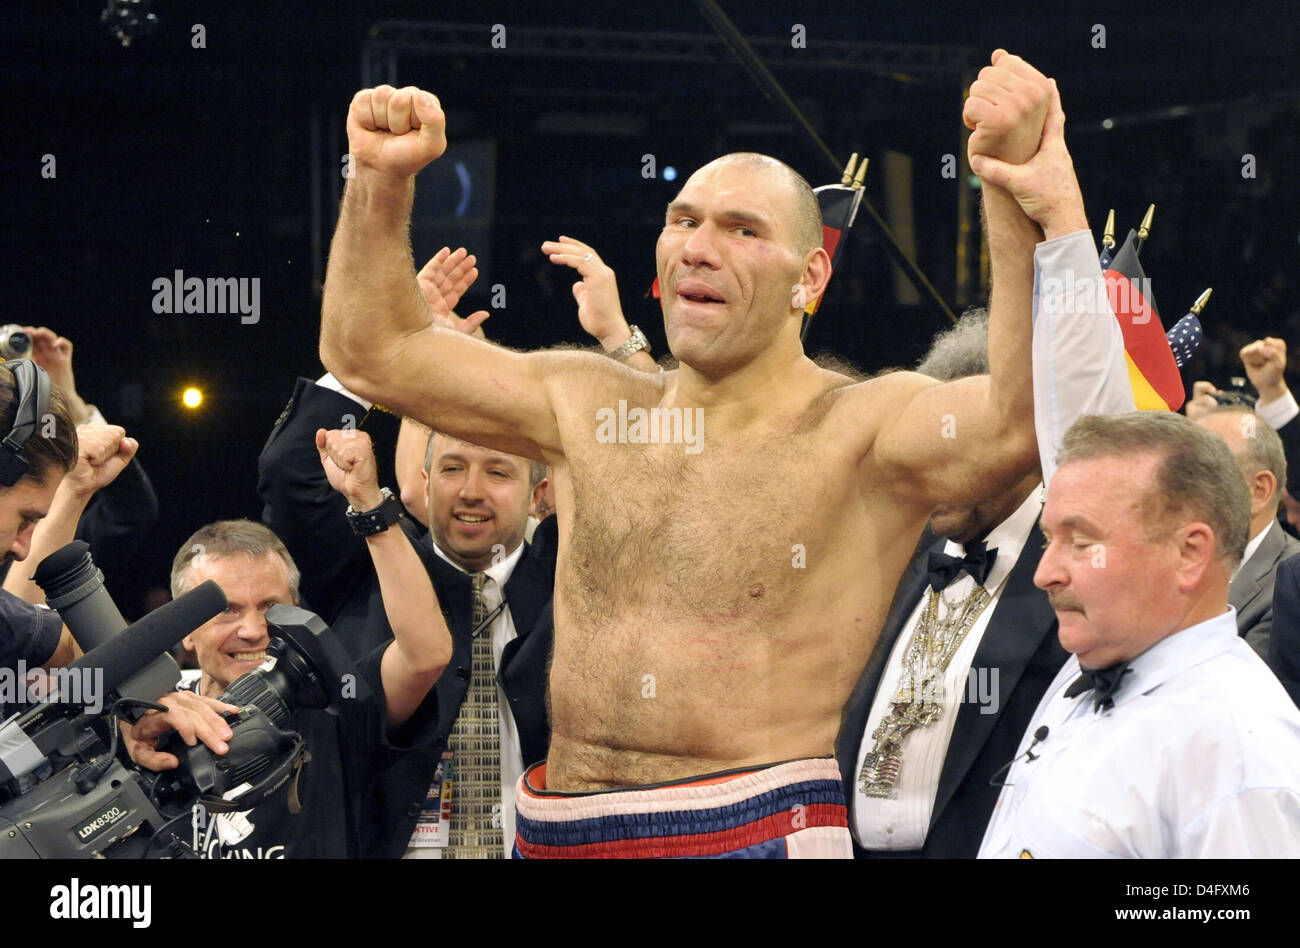 Russian boxer Nikolai Valuev cheers after his World Boxing Association (WBA) heavyweight title fight against US John Ruiz in Berlin, Germany, 30 August 2008. Valuev, who had lost the title in April 2007, won the fight in a split decision. Photo: Soeren Stache Stock Photo